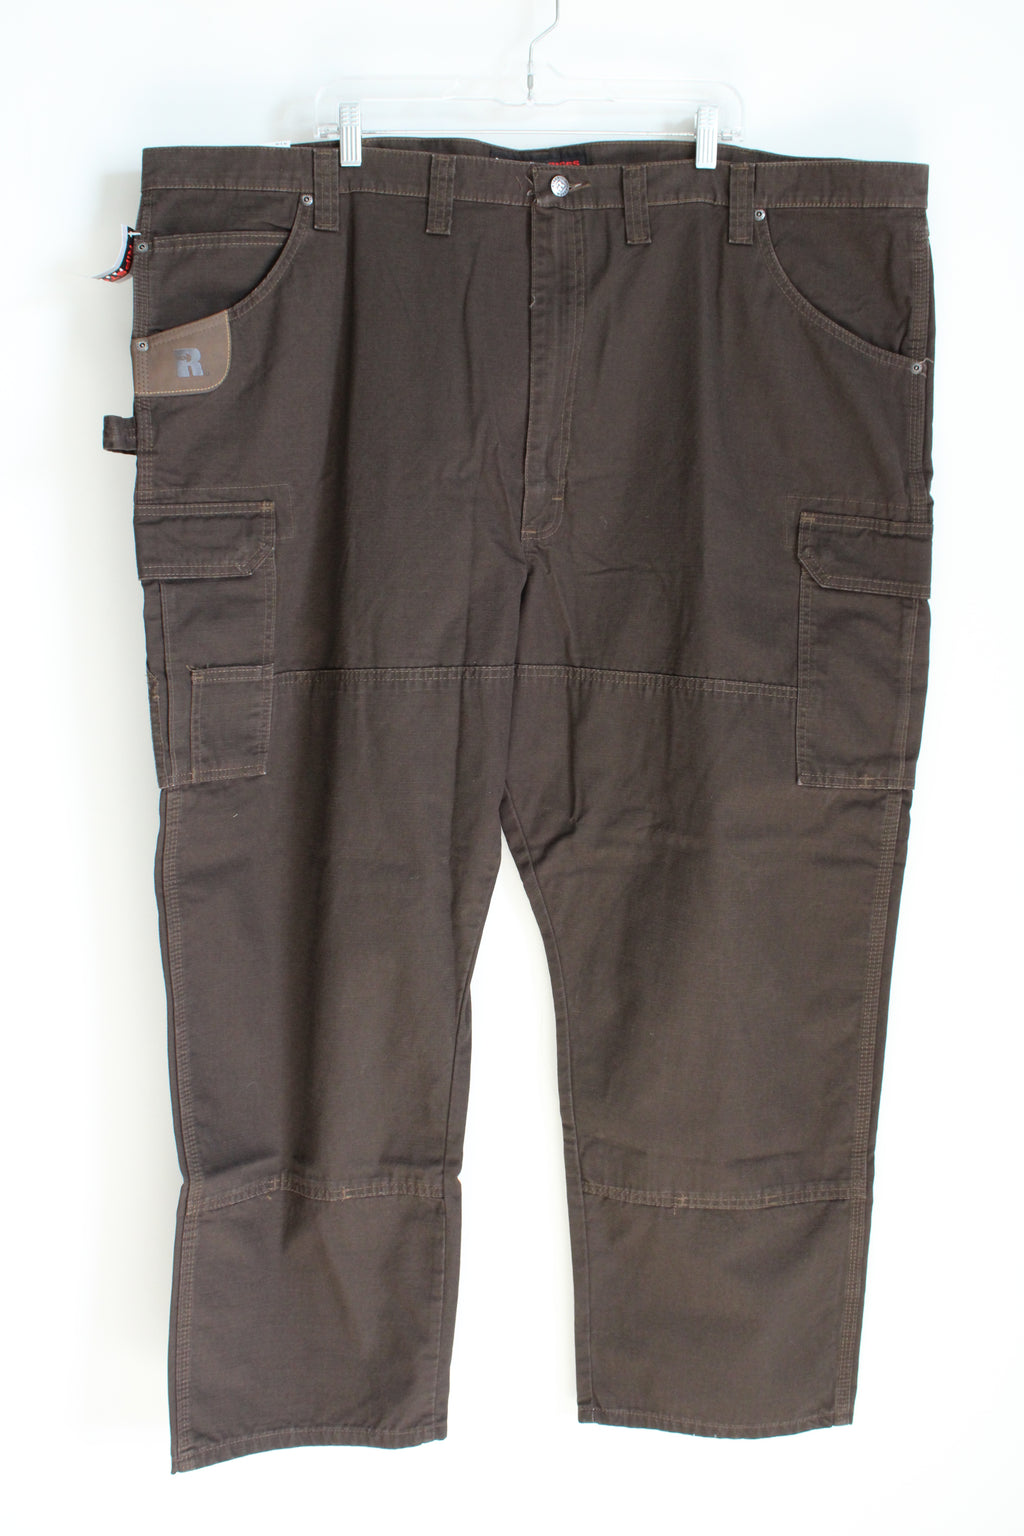 NEW Wrangler Riggs Workwear Brown Ranger Relaxed Fit Pants | 50X30